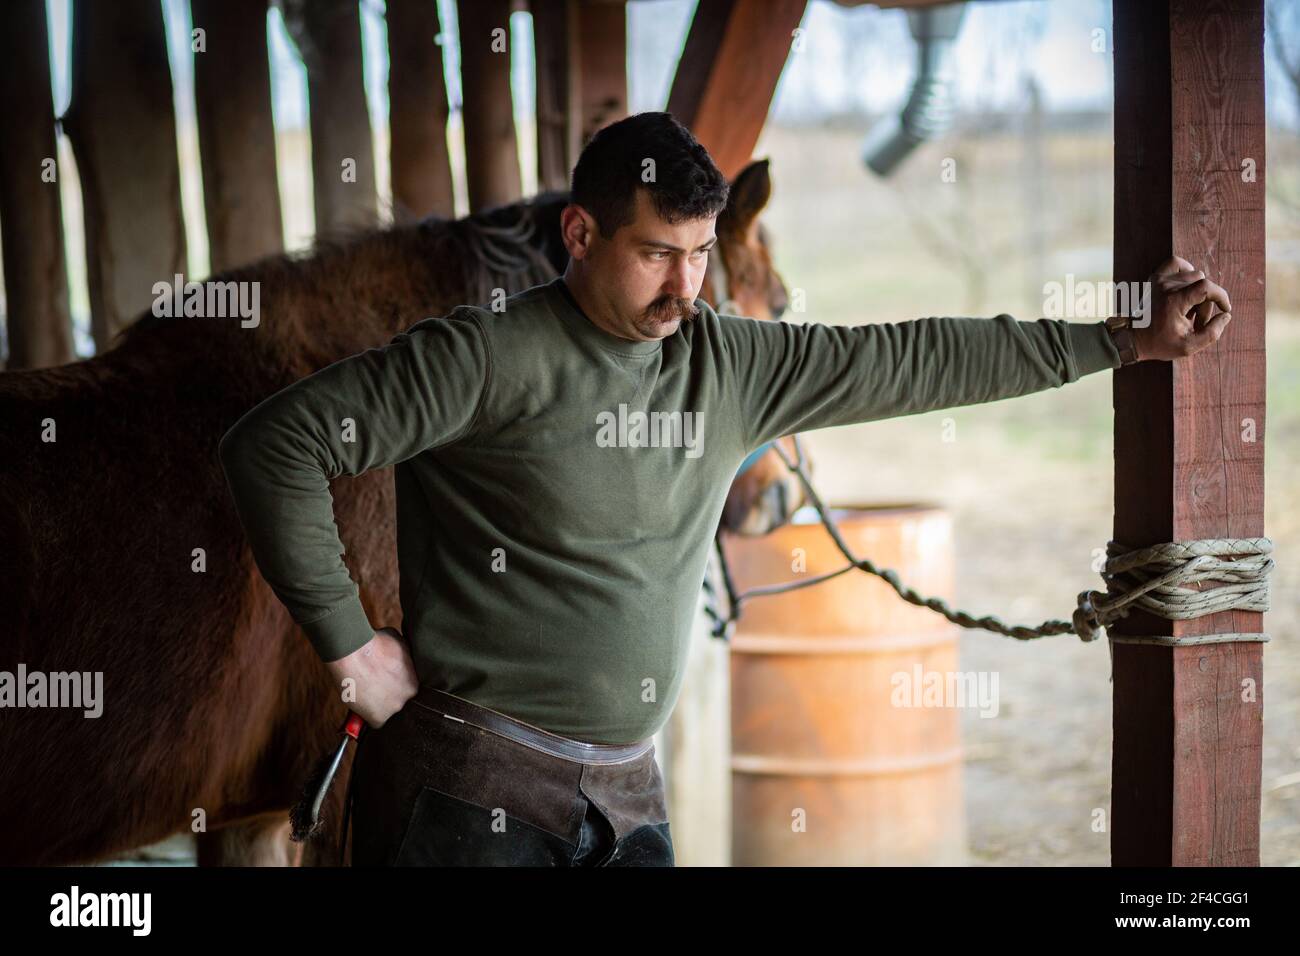 Man is taking a break after putting on shoe on several horses Stock Photo